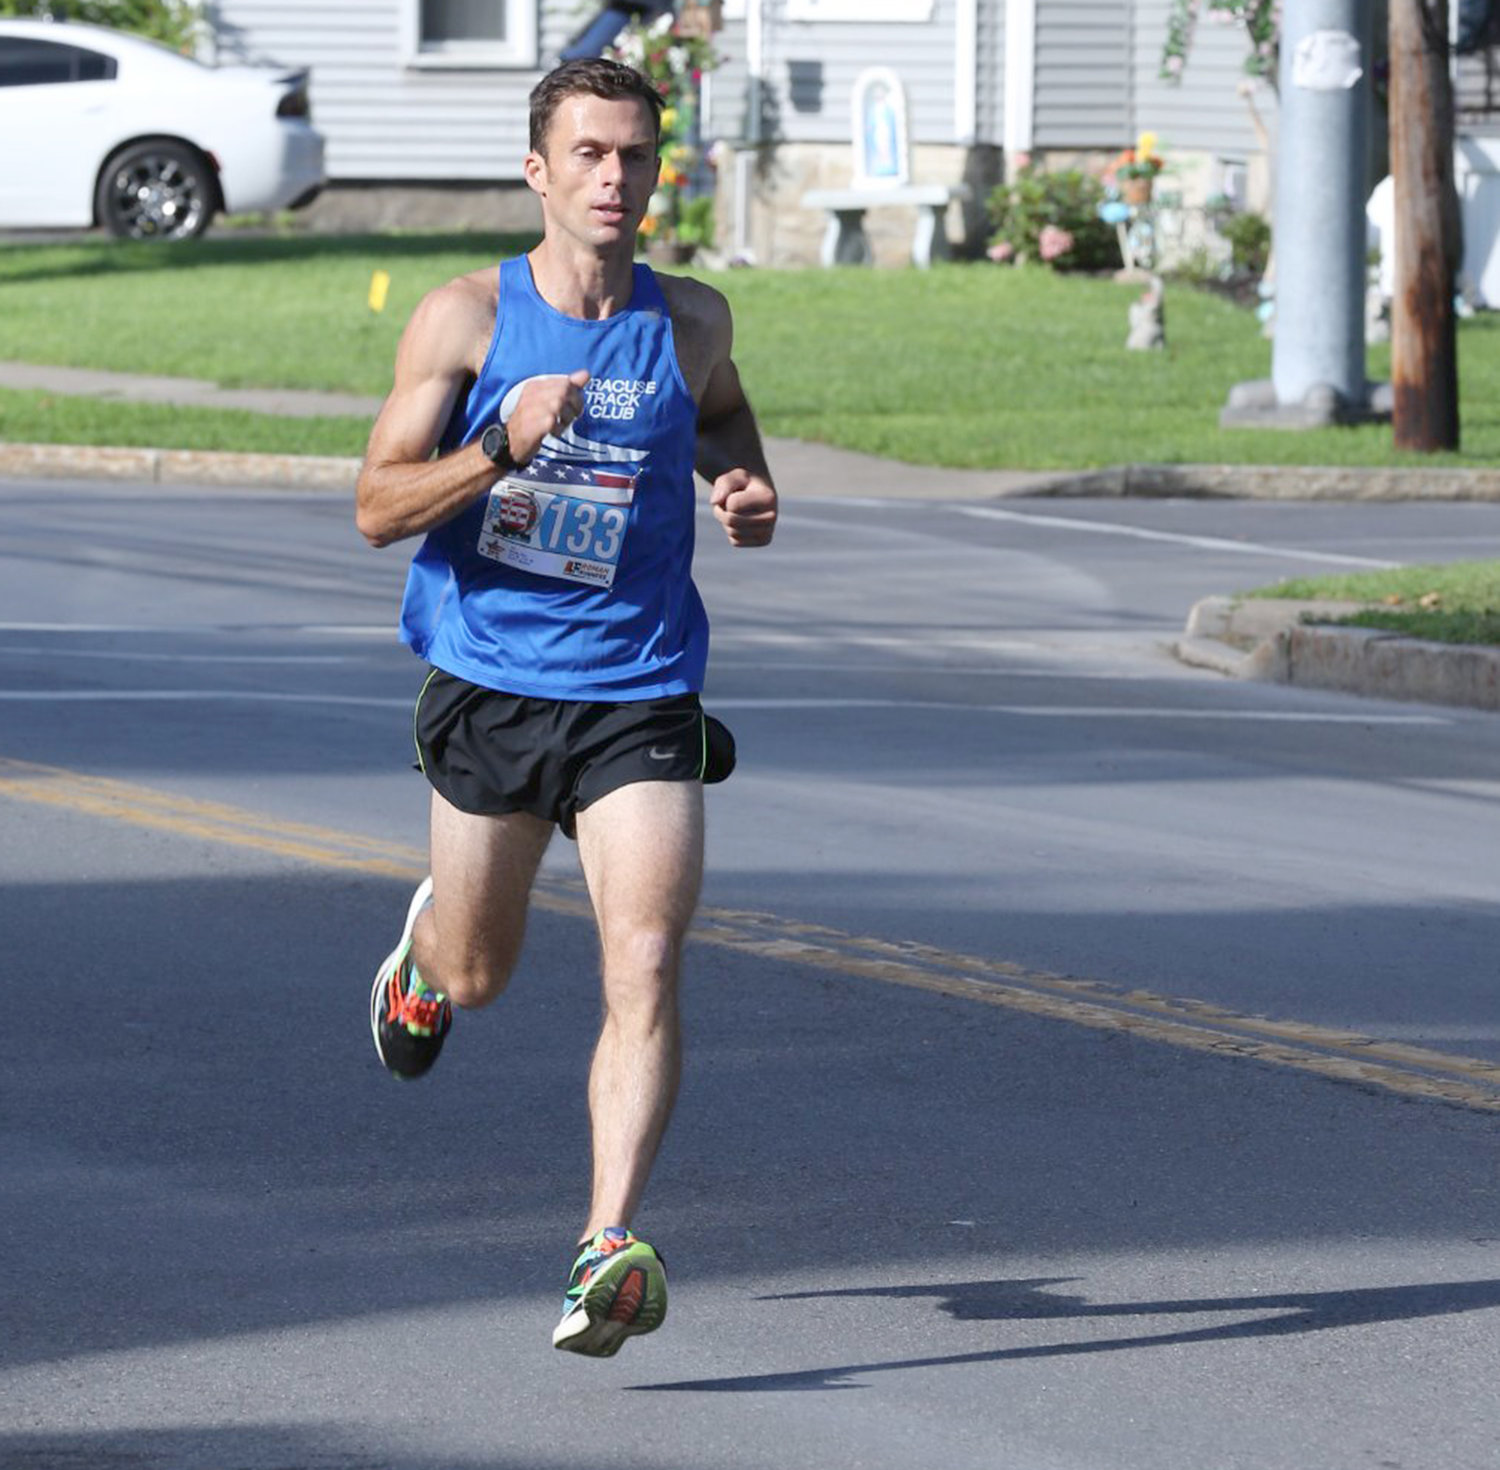 Sam Morse of Camden won the 50th annual Honor America Days 5K Parade Run on Saturday in Rome. His time was 15:05.